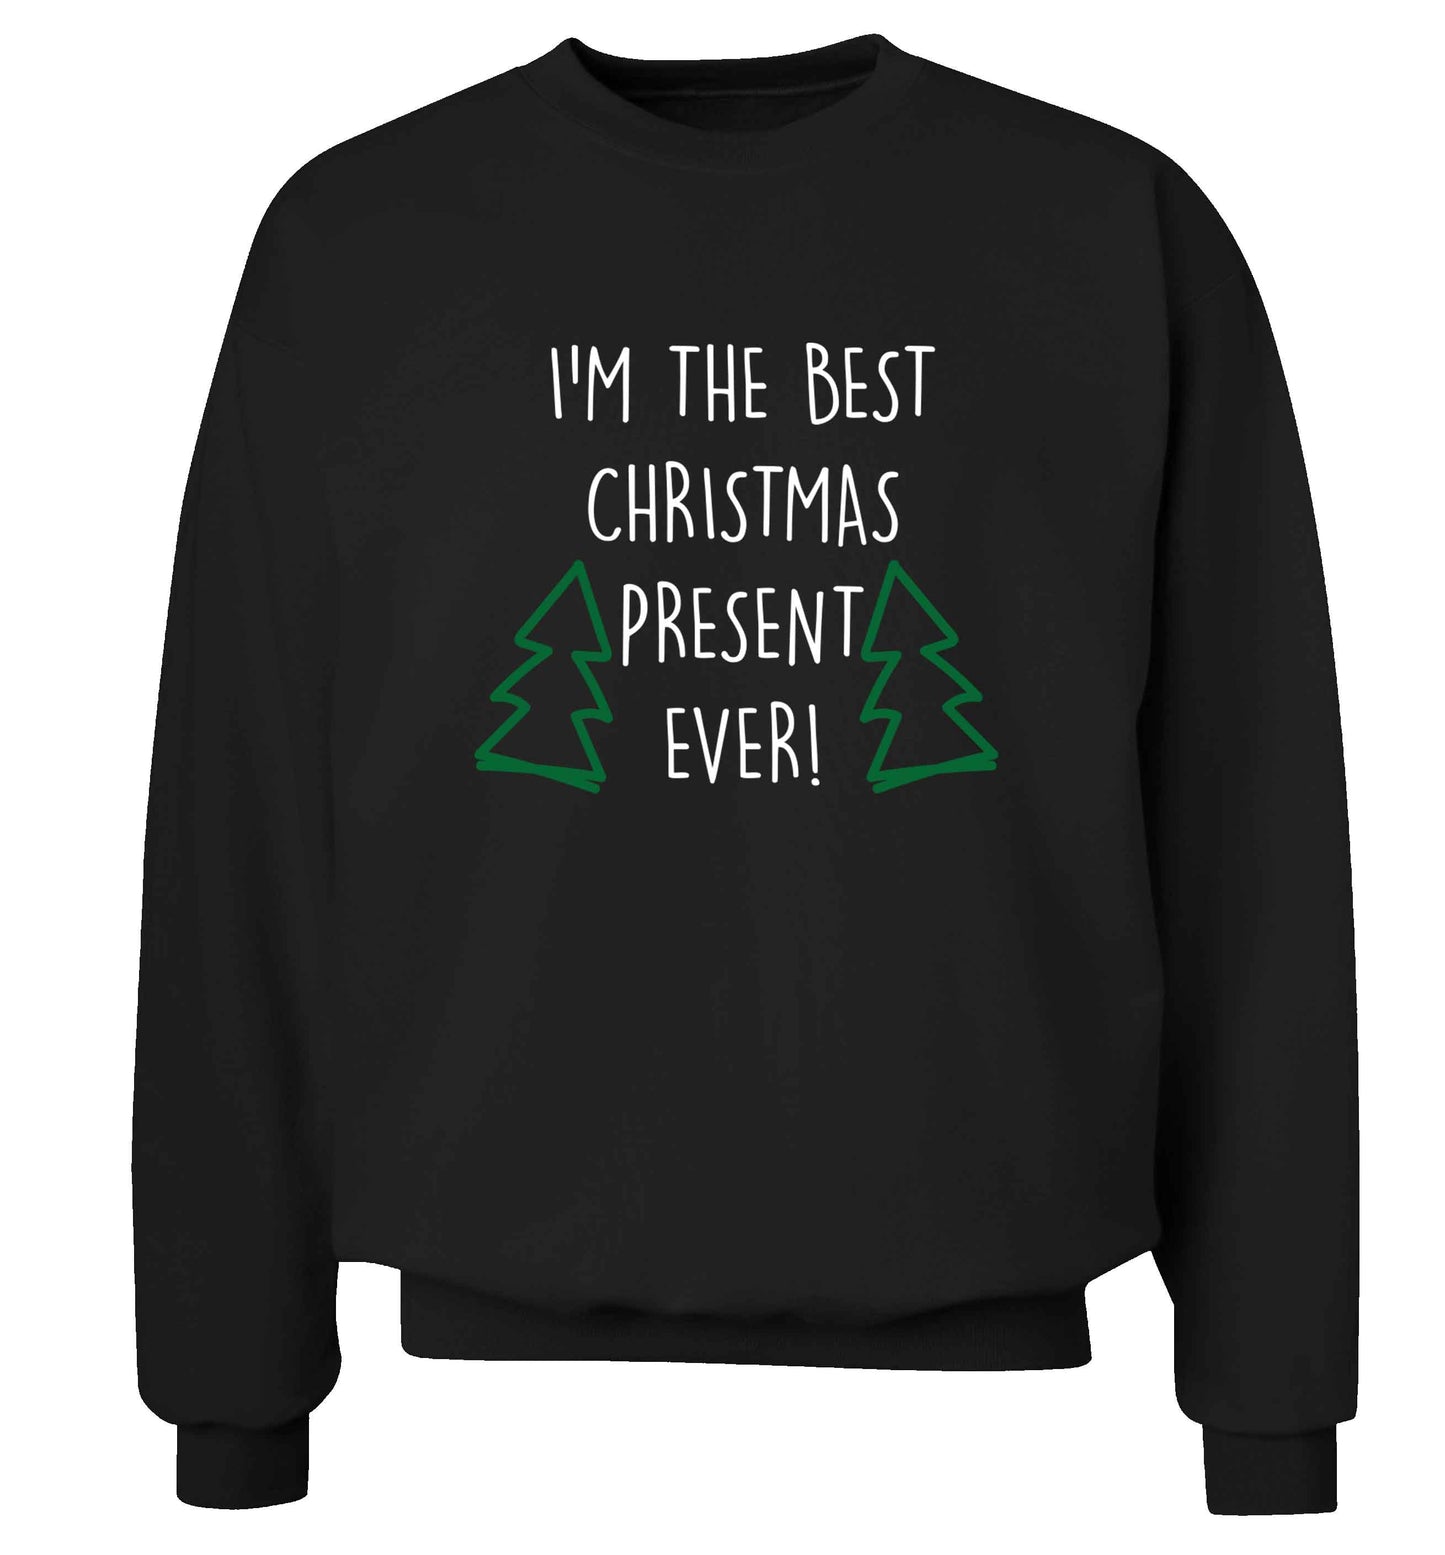 I'm the best Christmas present ever adult's unisex black sweater 2XL